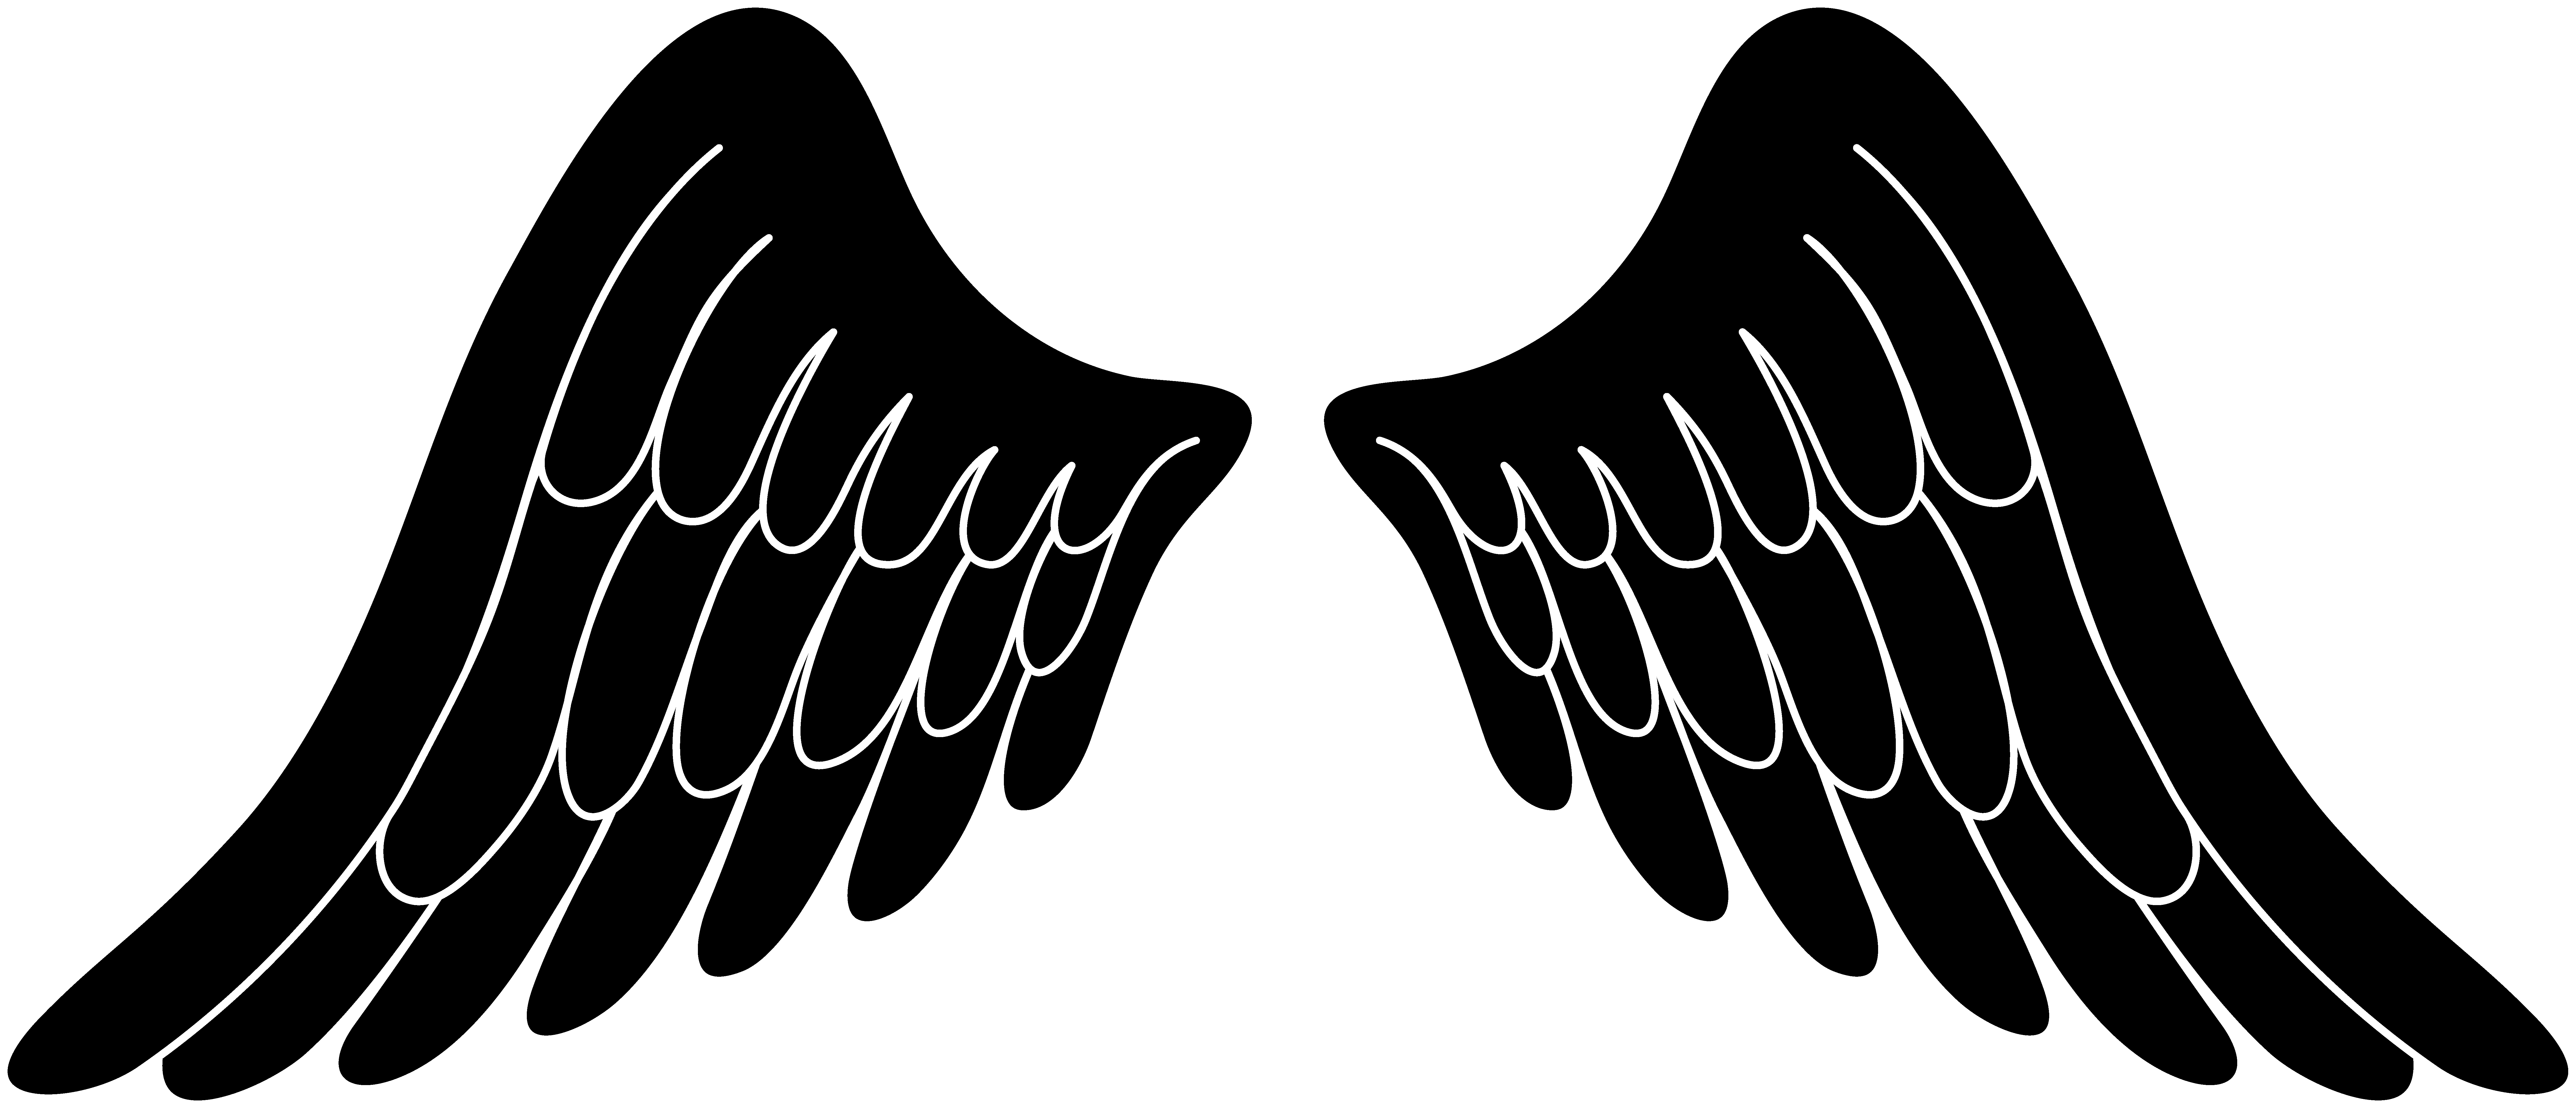 Angel wing clip art free vect